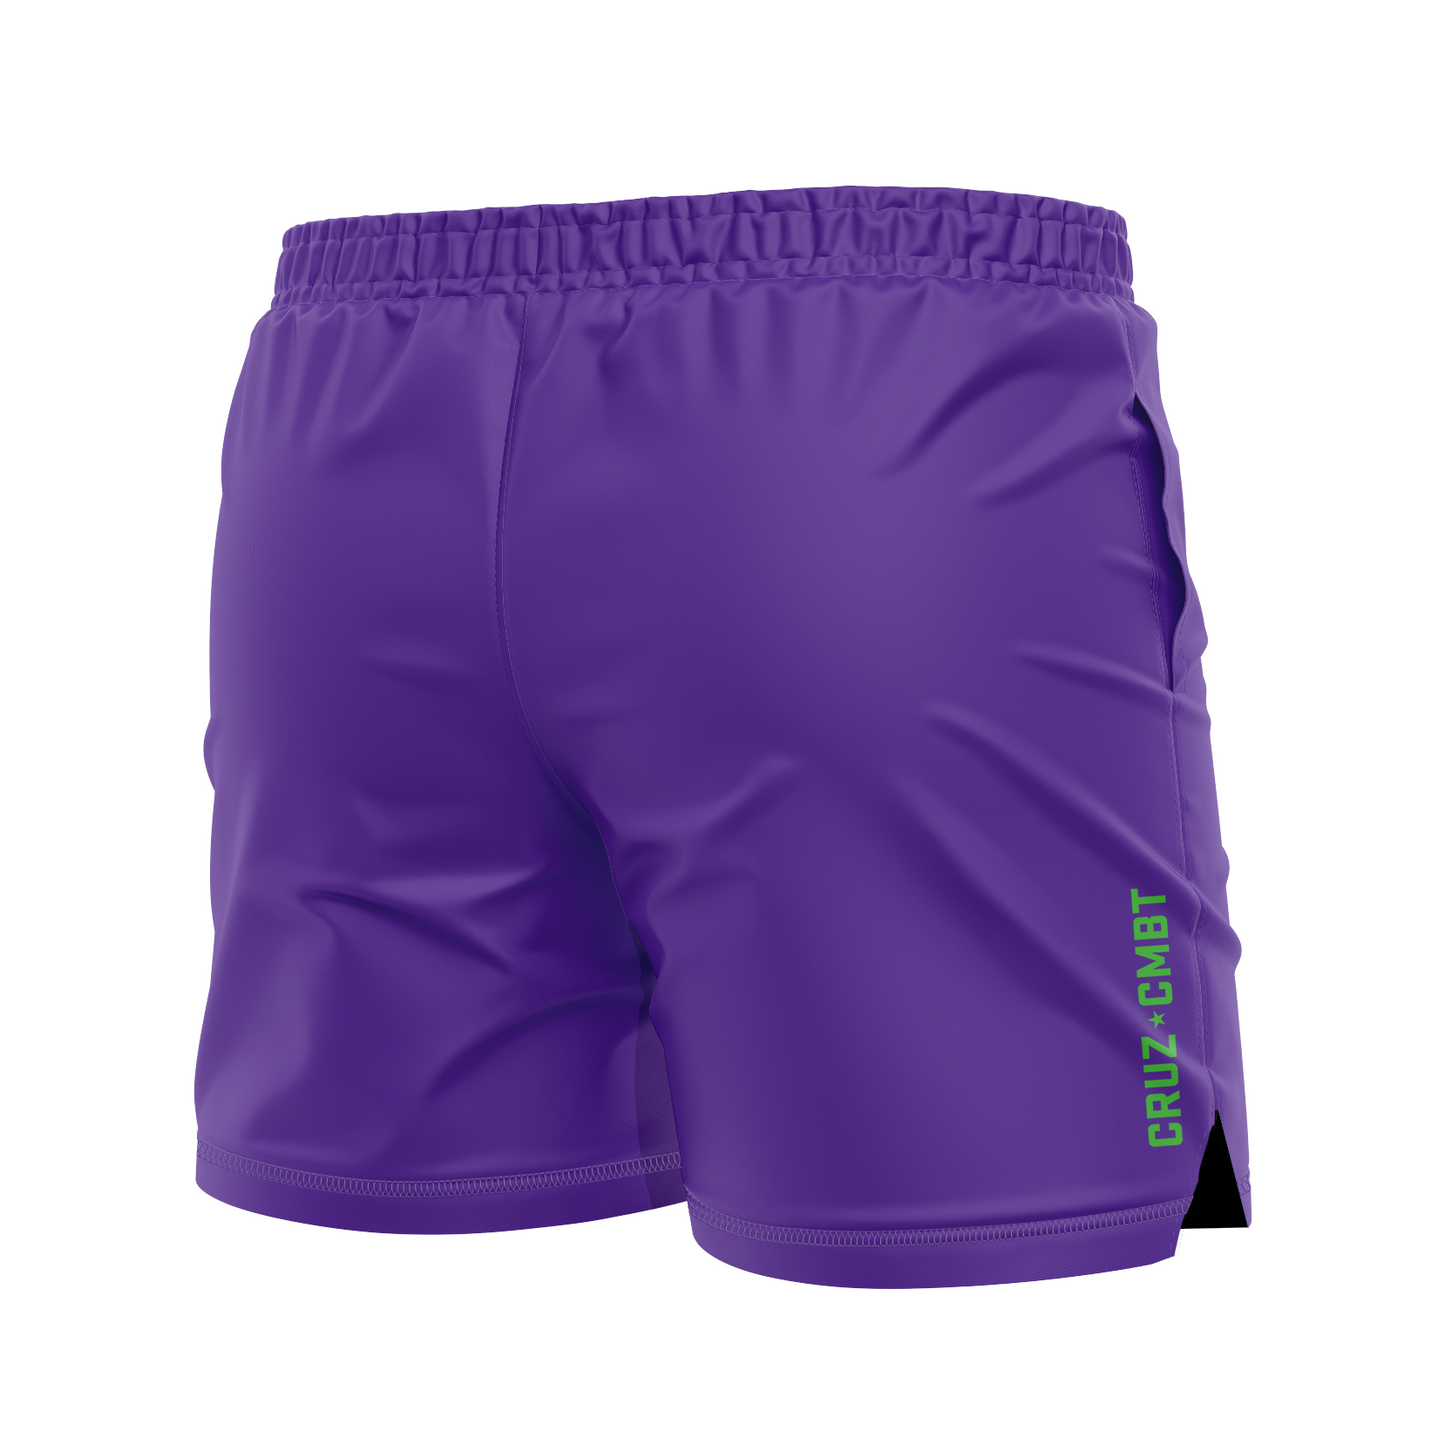 Base Collection men's FC shorts, purple and green